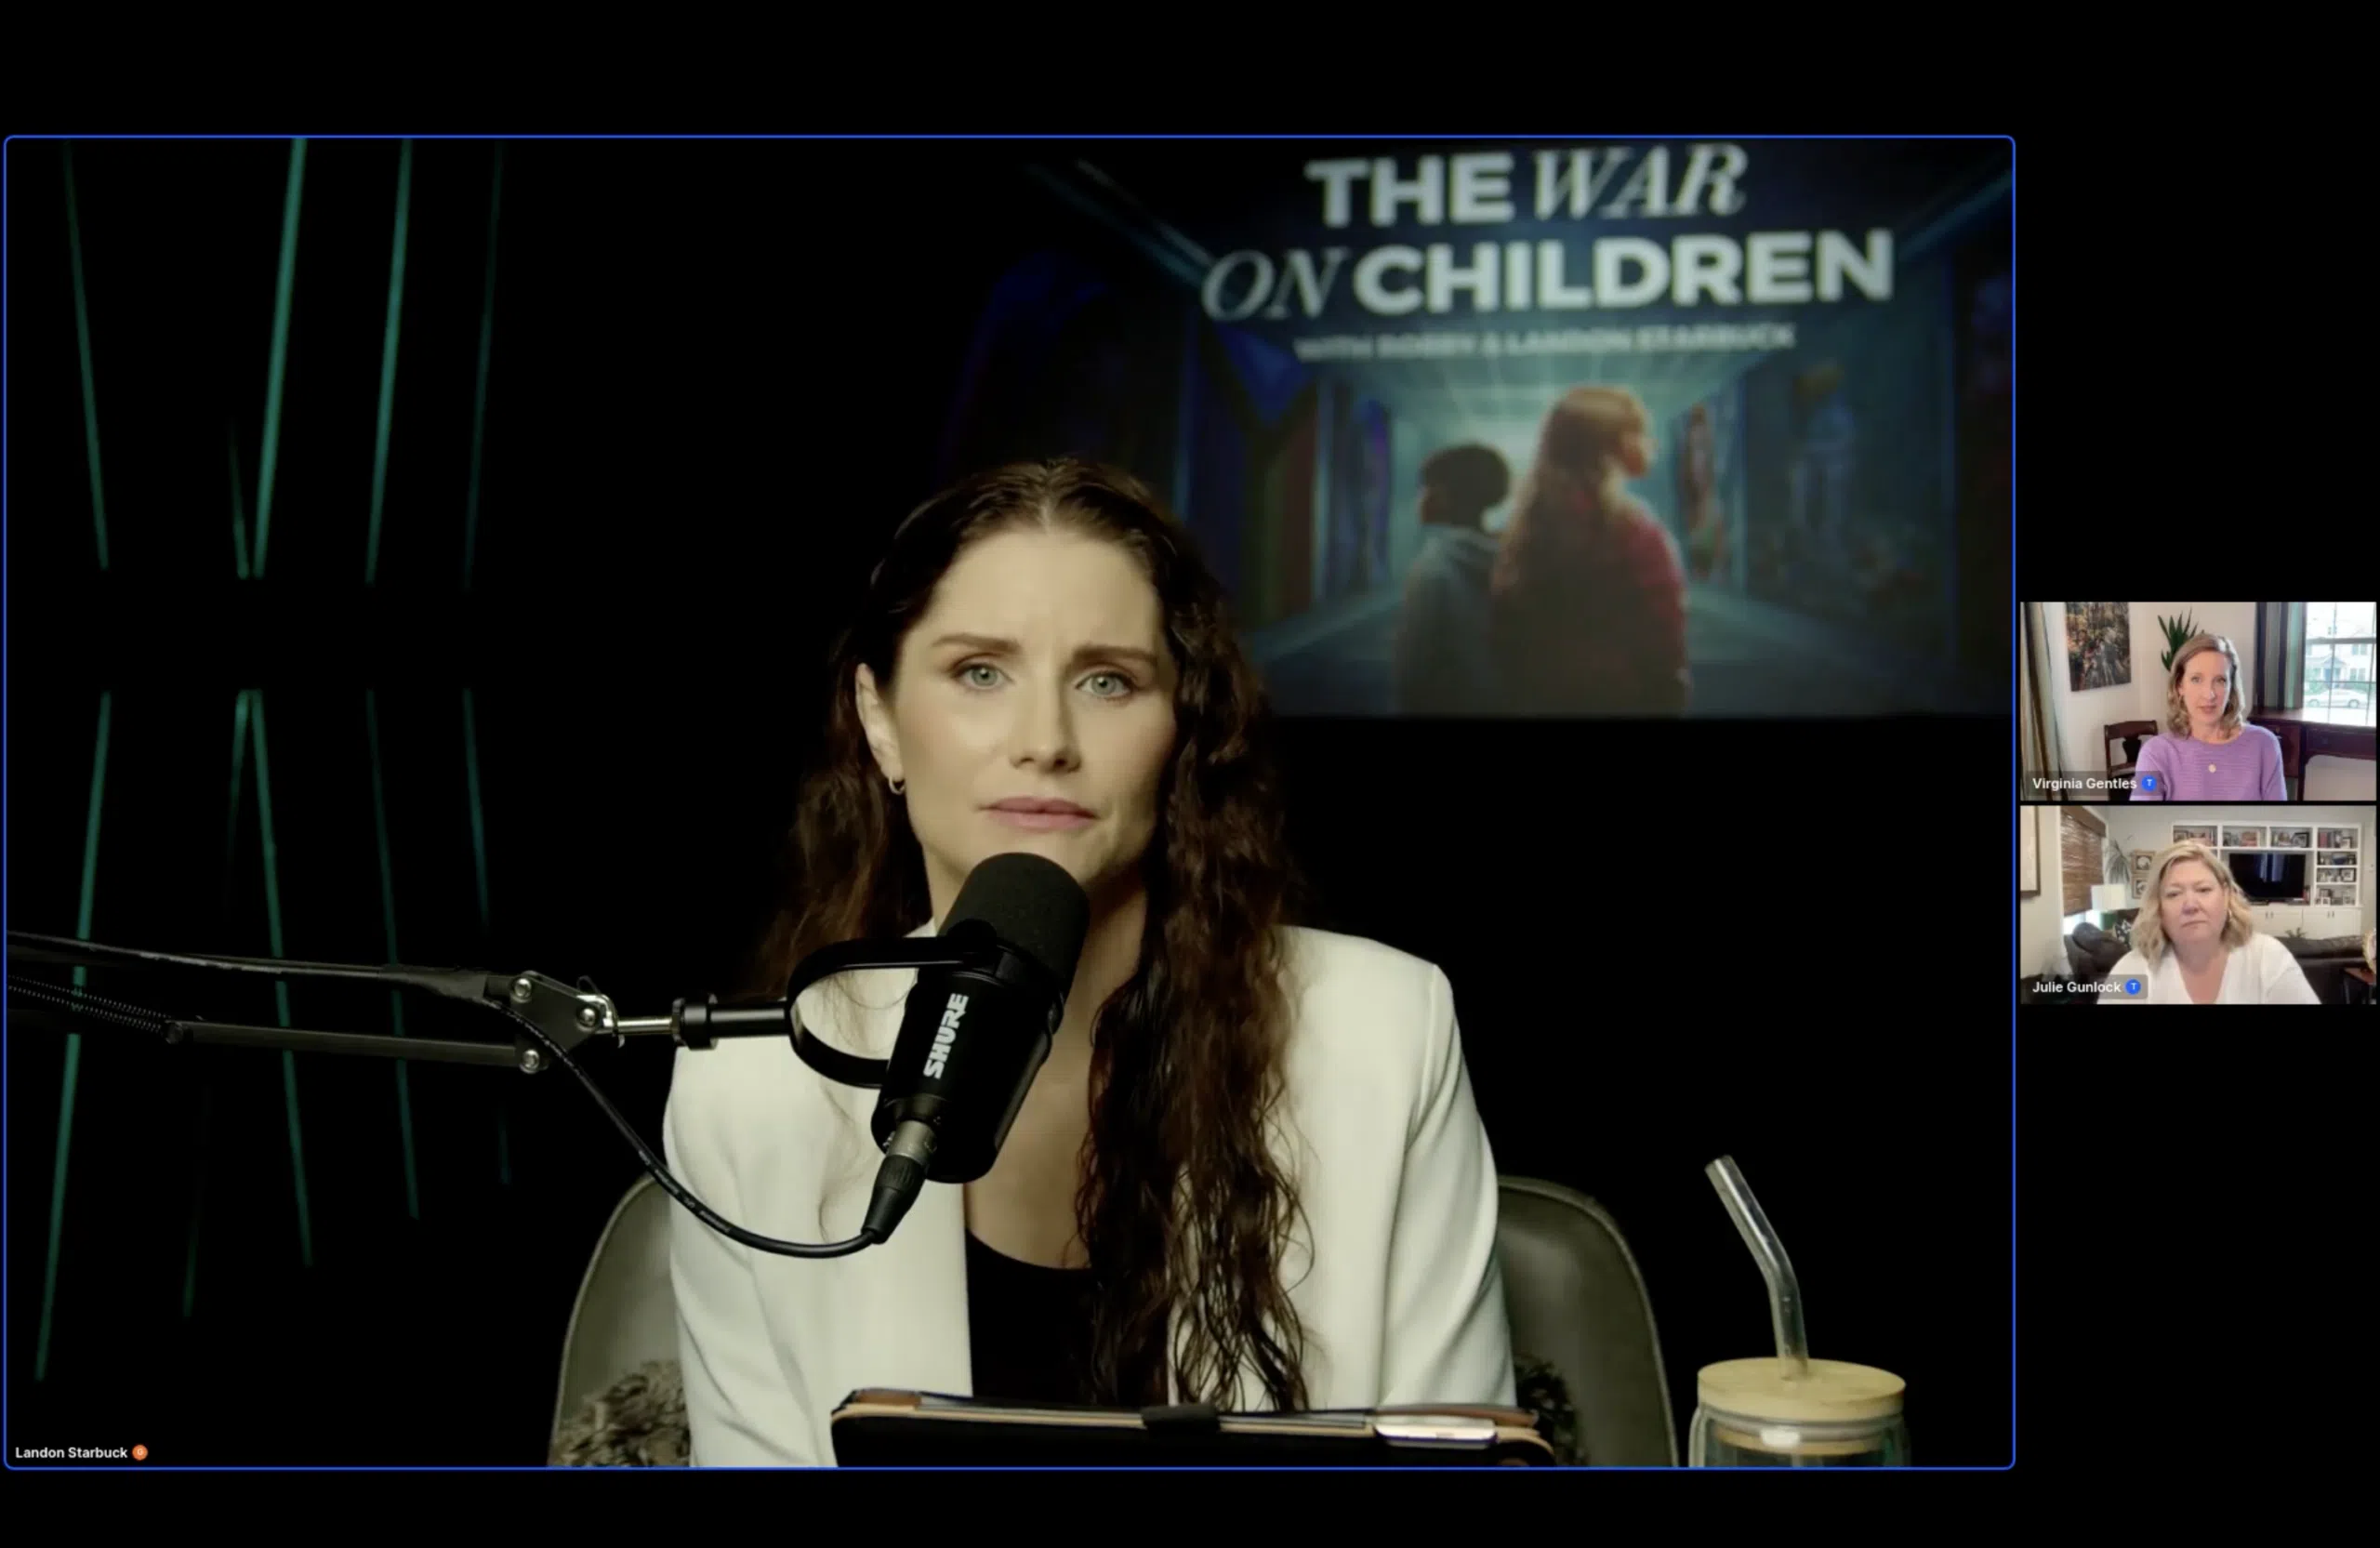 IWN Live: Behind-The-Scenes Of “The War On Children” with Landon Starbuck